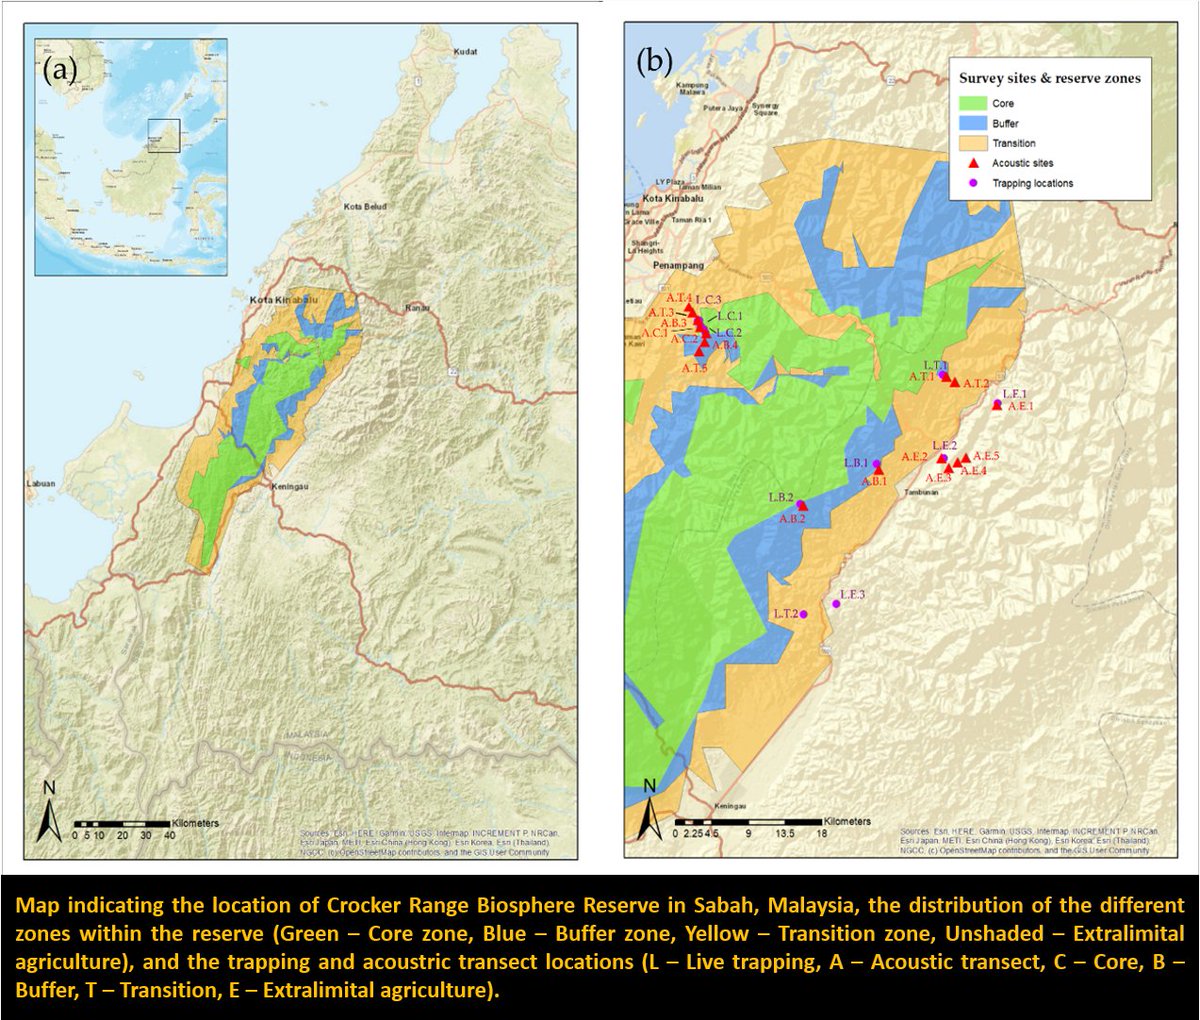 1/5  #WBTC1  #Conserve3 Biosphere reserves buffer protected habitats with zones of limited use, but do these zones protectdiversity? We surveyedin core, buffer, transition and extralimital zone in Crocker Range Biosphere Reserves (CRBR), Sabah, Malaysia.  https://bit.ly/2TIqDfp 